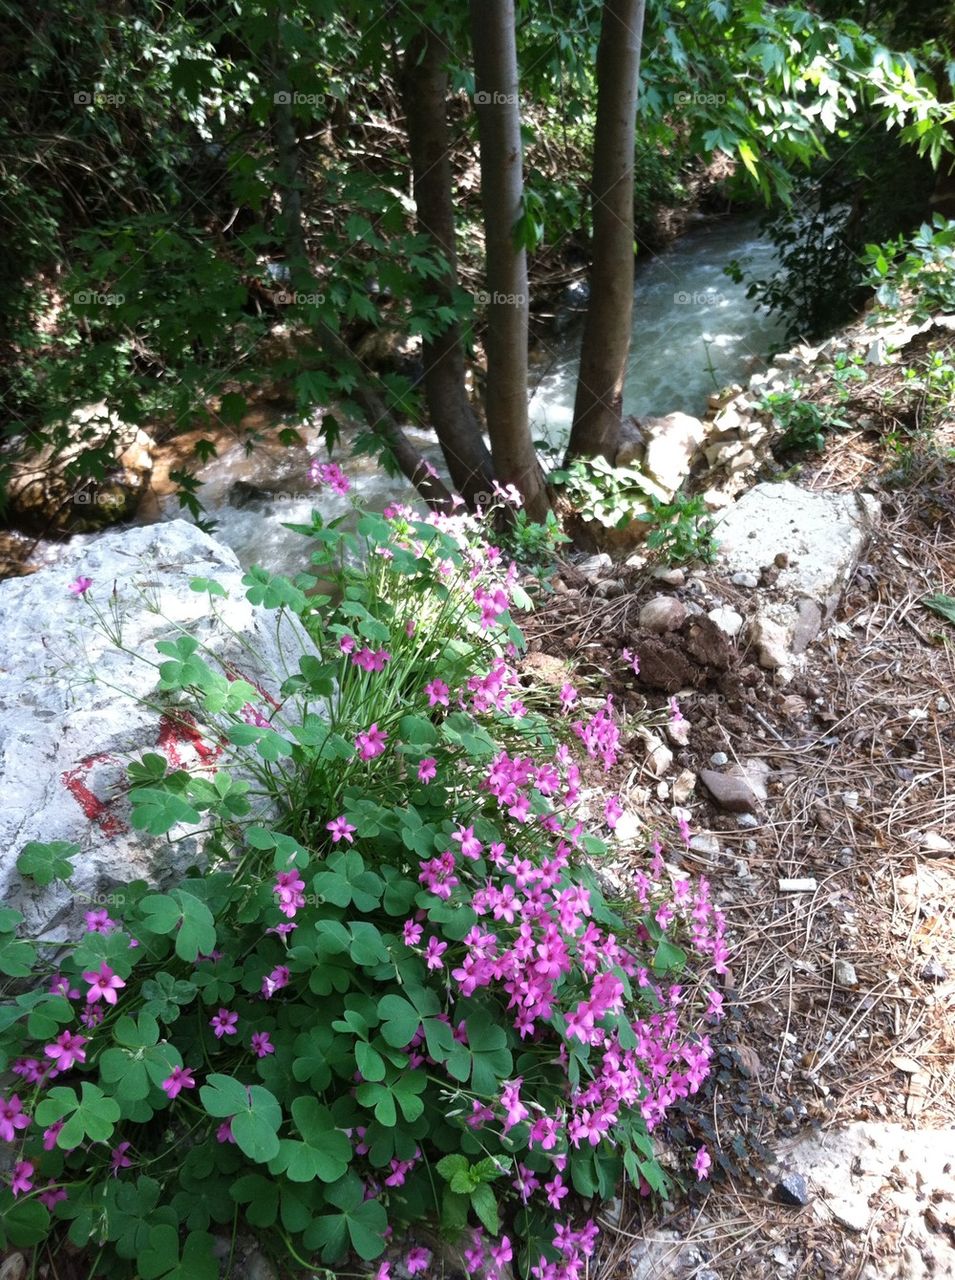 Rock flowers by the stream